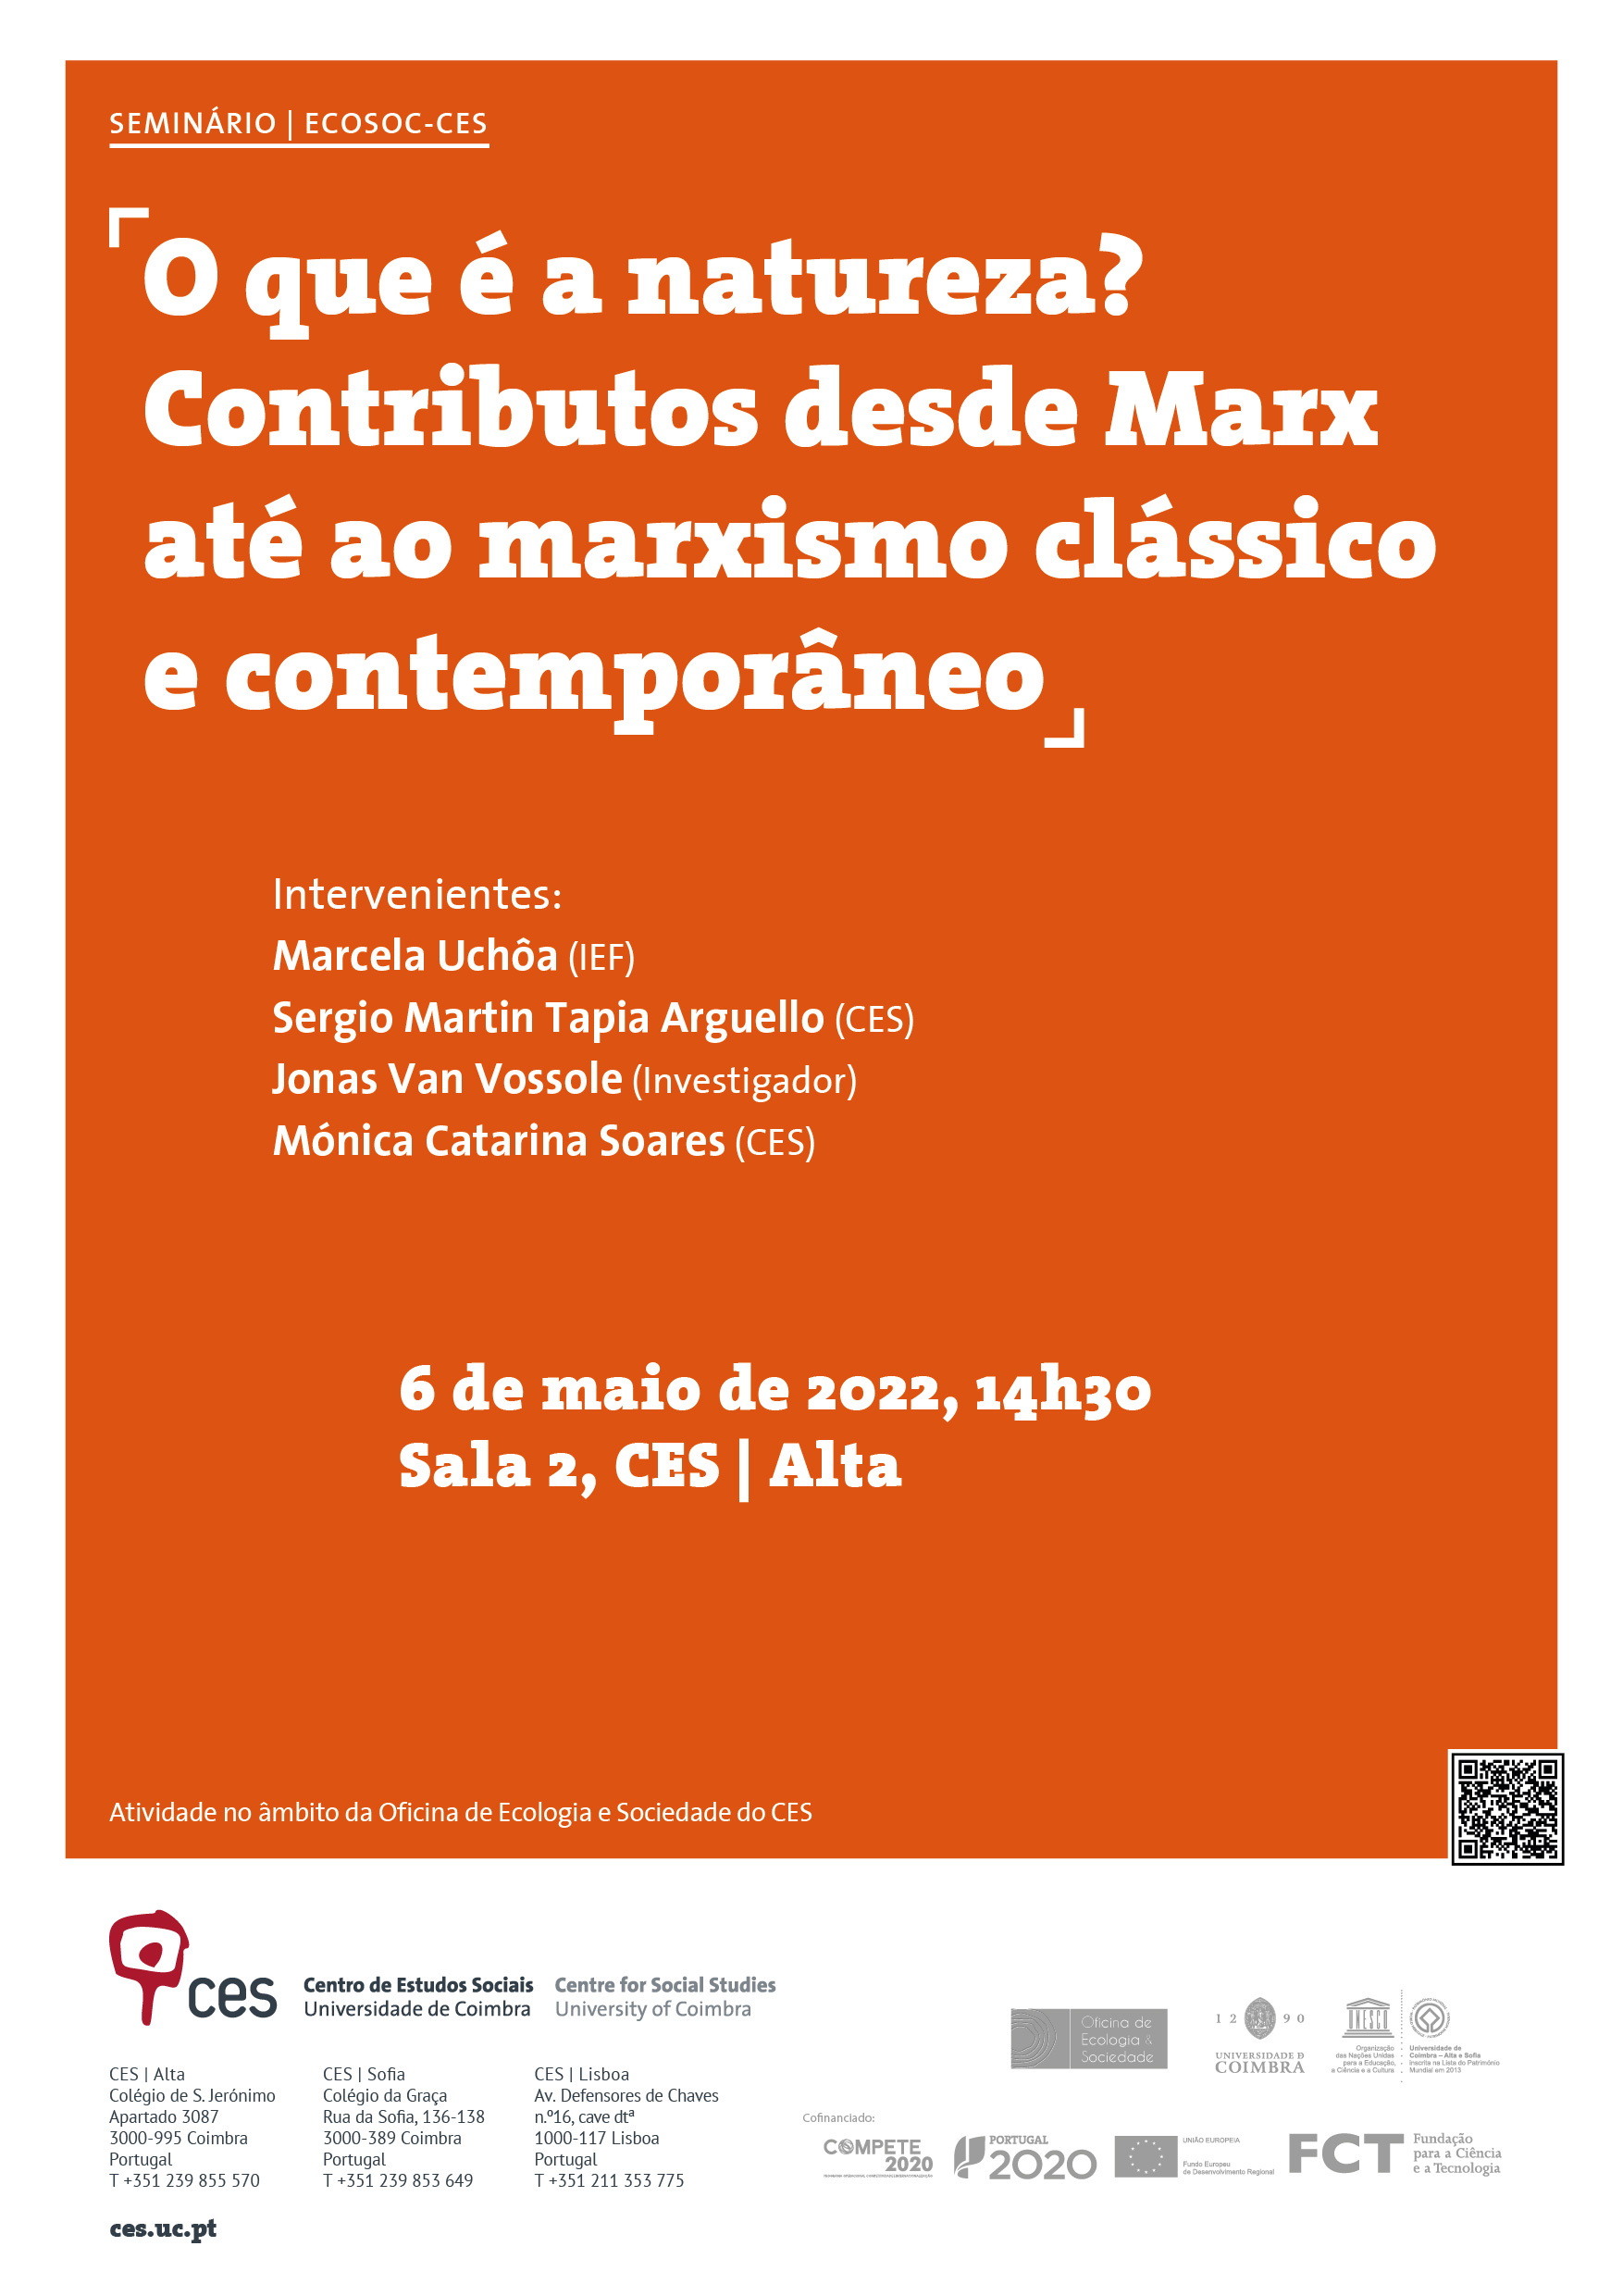 What is nature? Contributions from Marx to classic and contemporary marxism<span id="edit_36041"><script>$(function() { $('#edit_36041').load( "/myces/user/editobj.php?tipo=evento&id=36041" ); });</script></span>